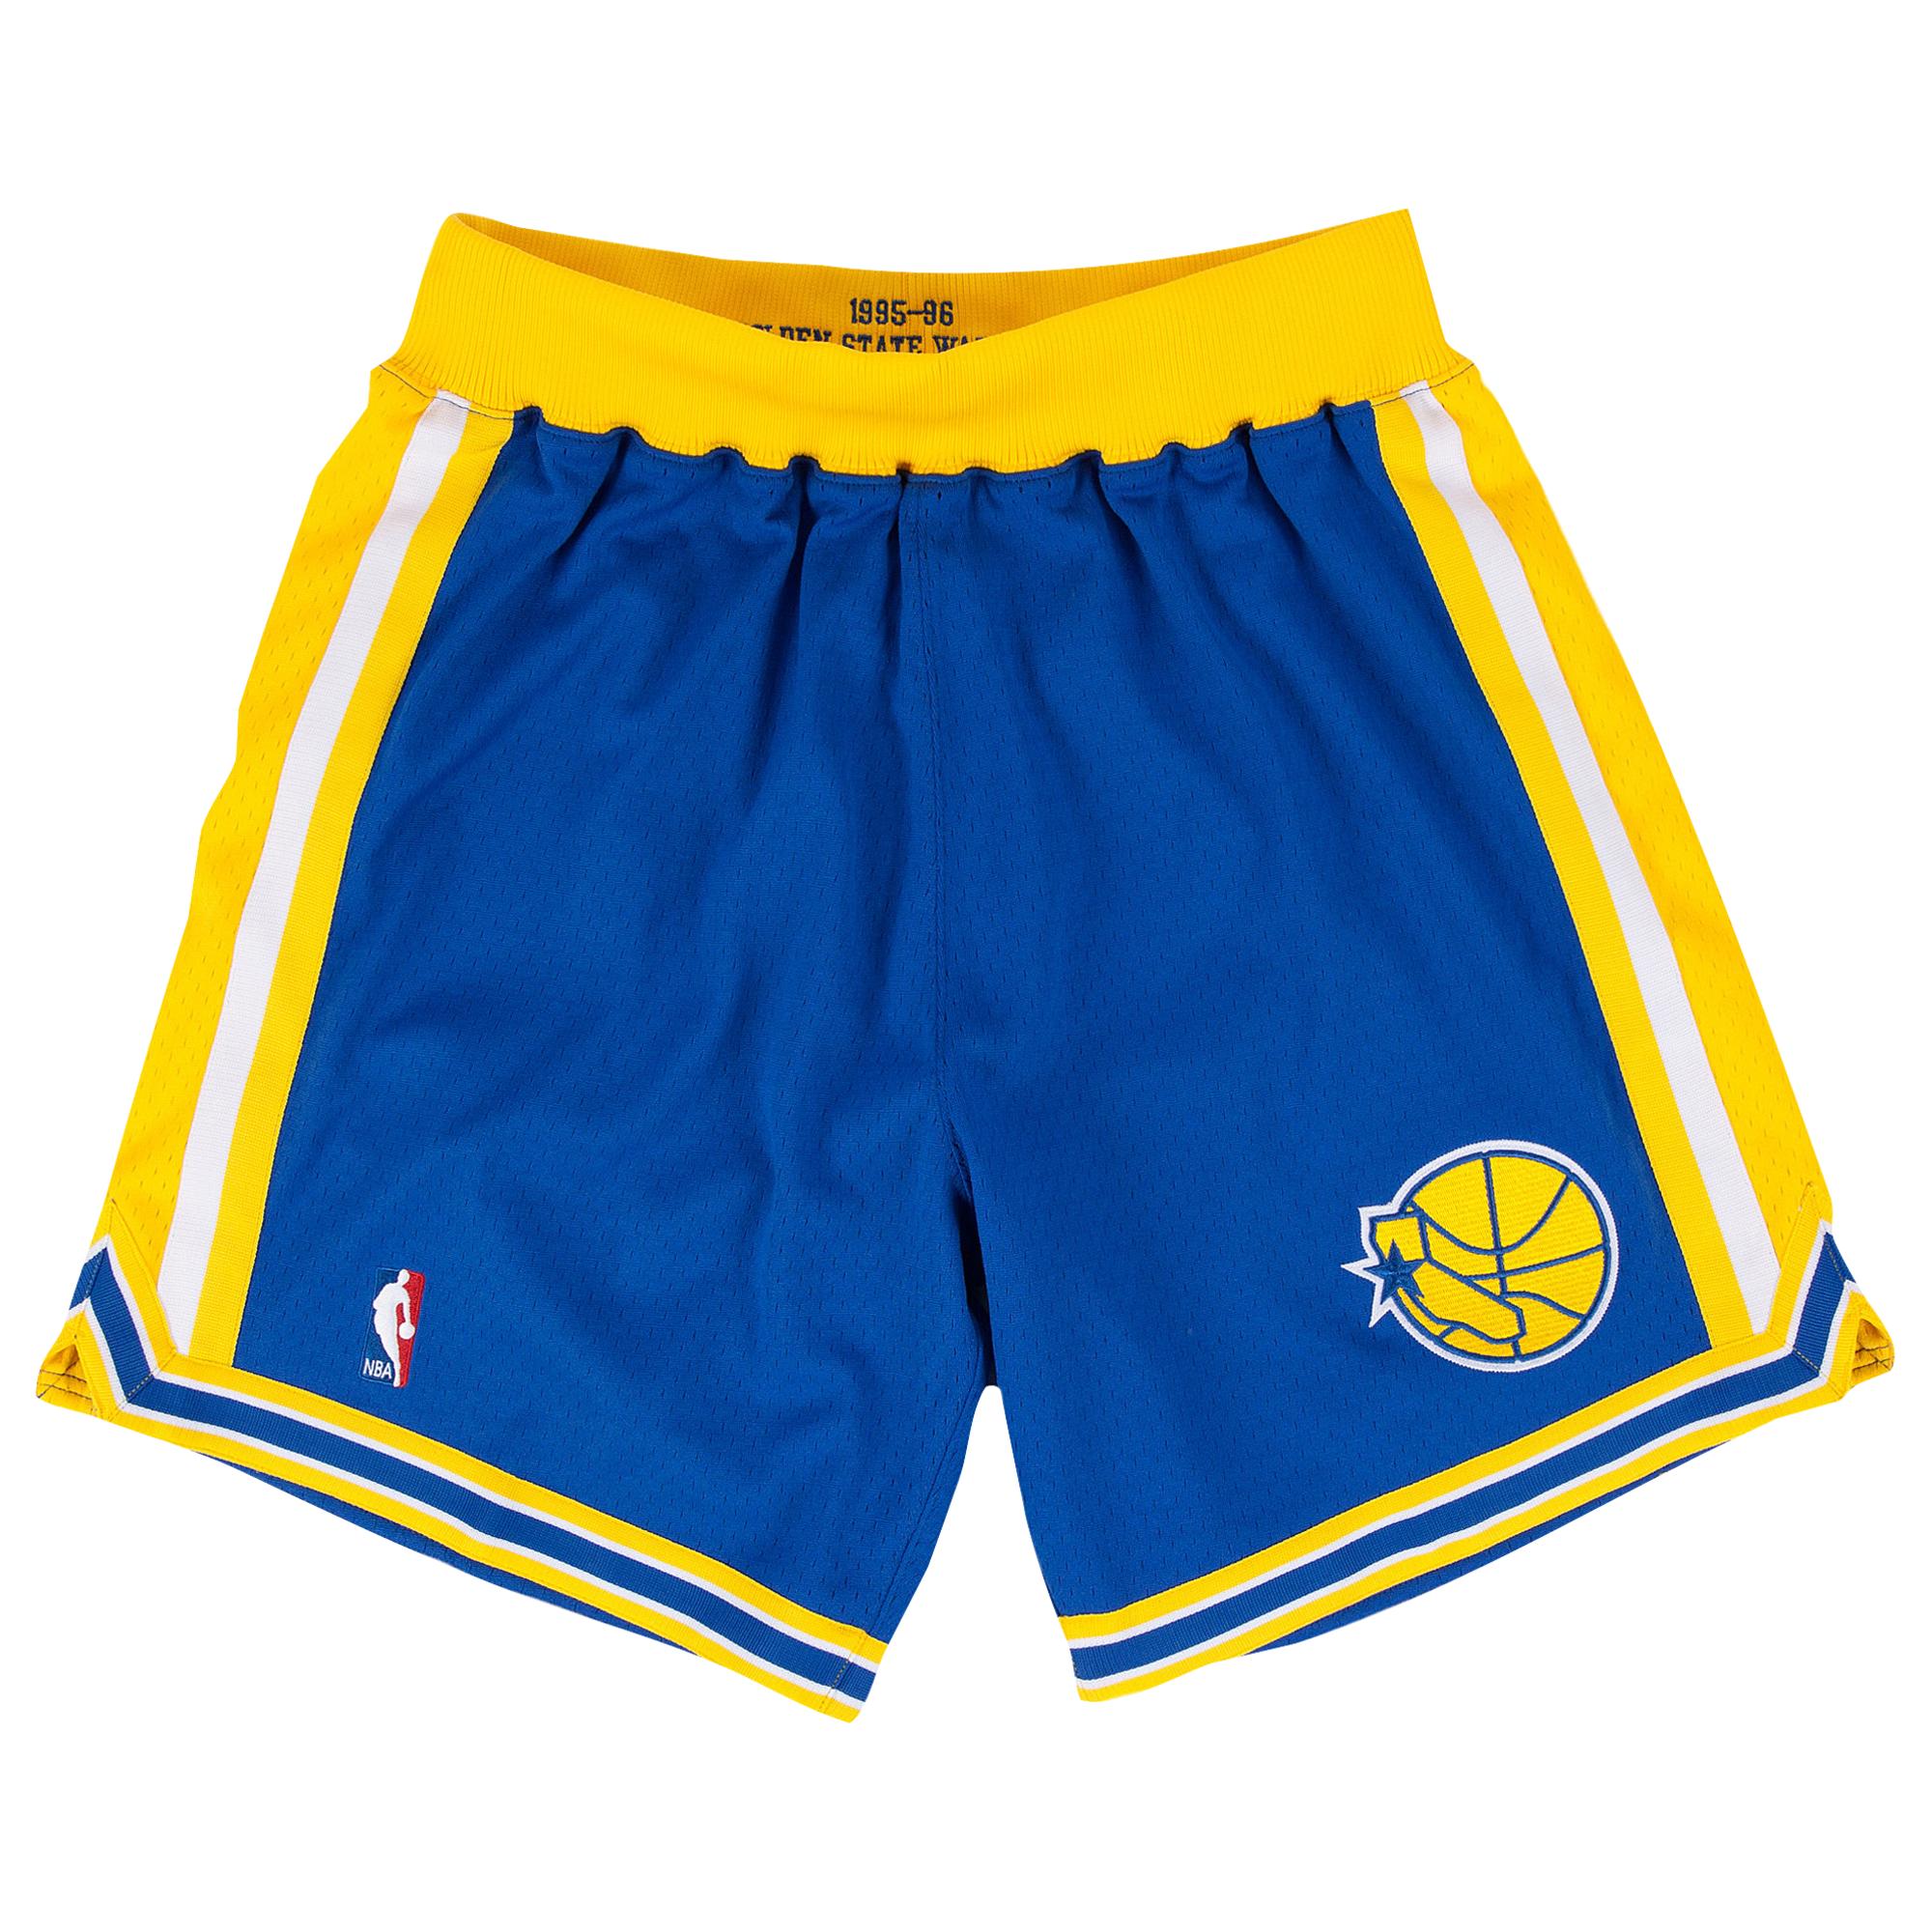 Golden State Warriors Nba Authentic 